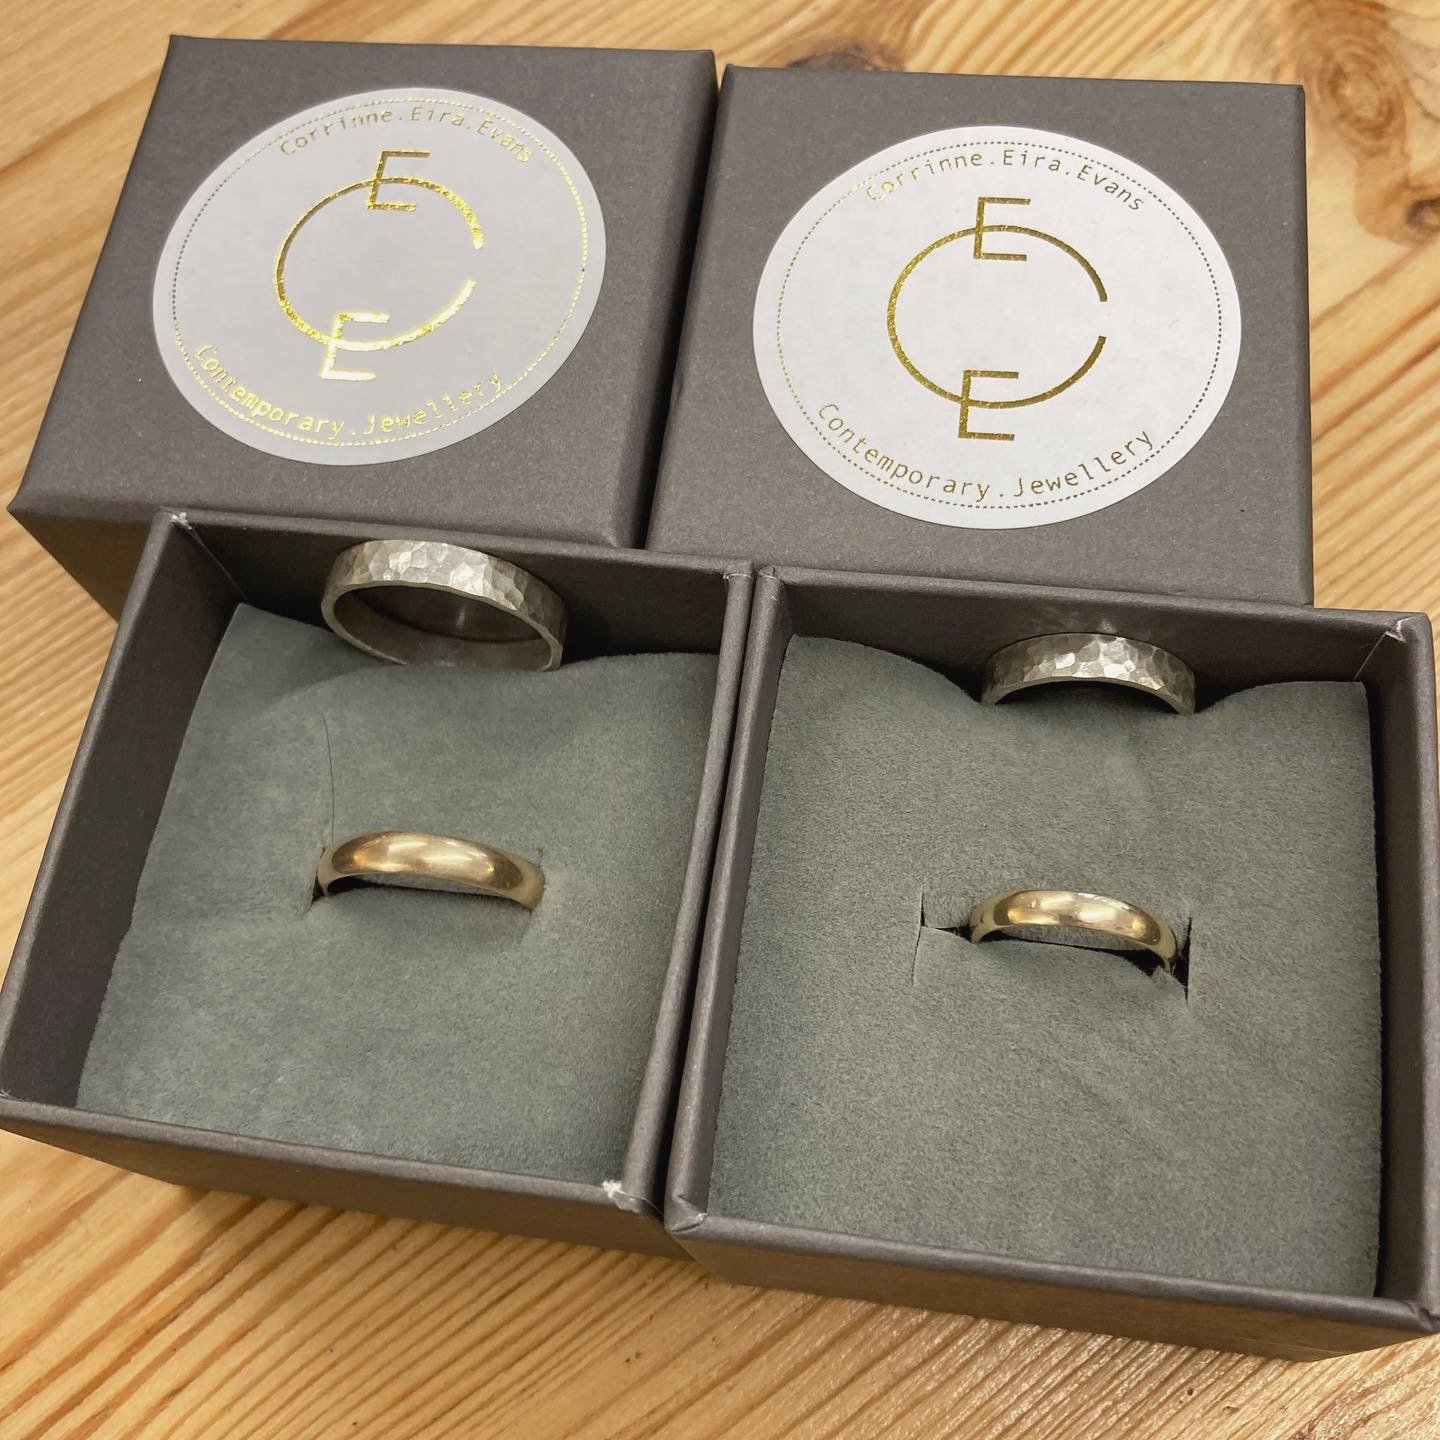 Handcrafted Wedding Rings